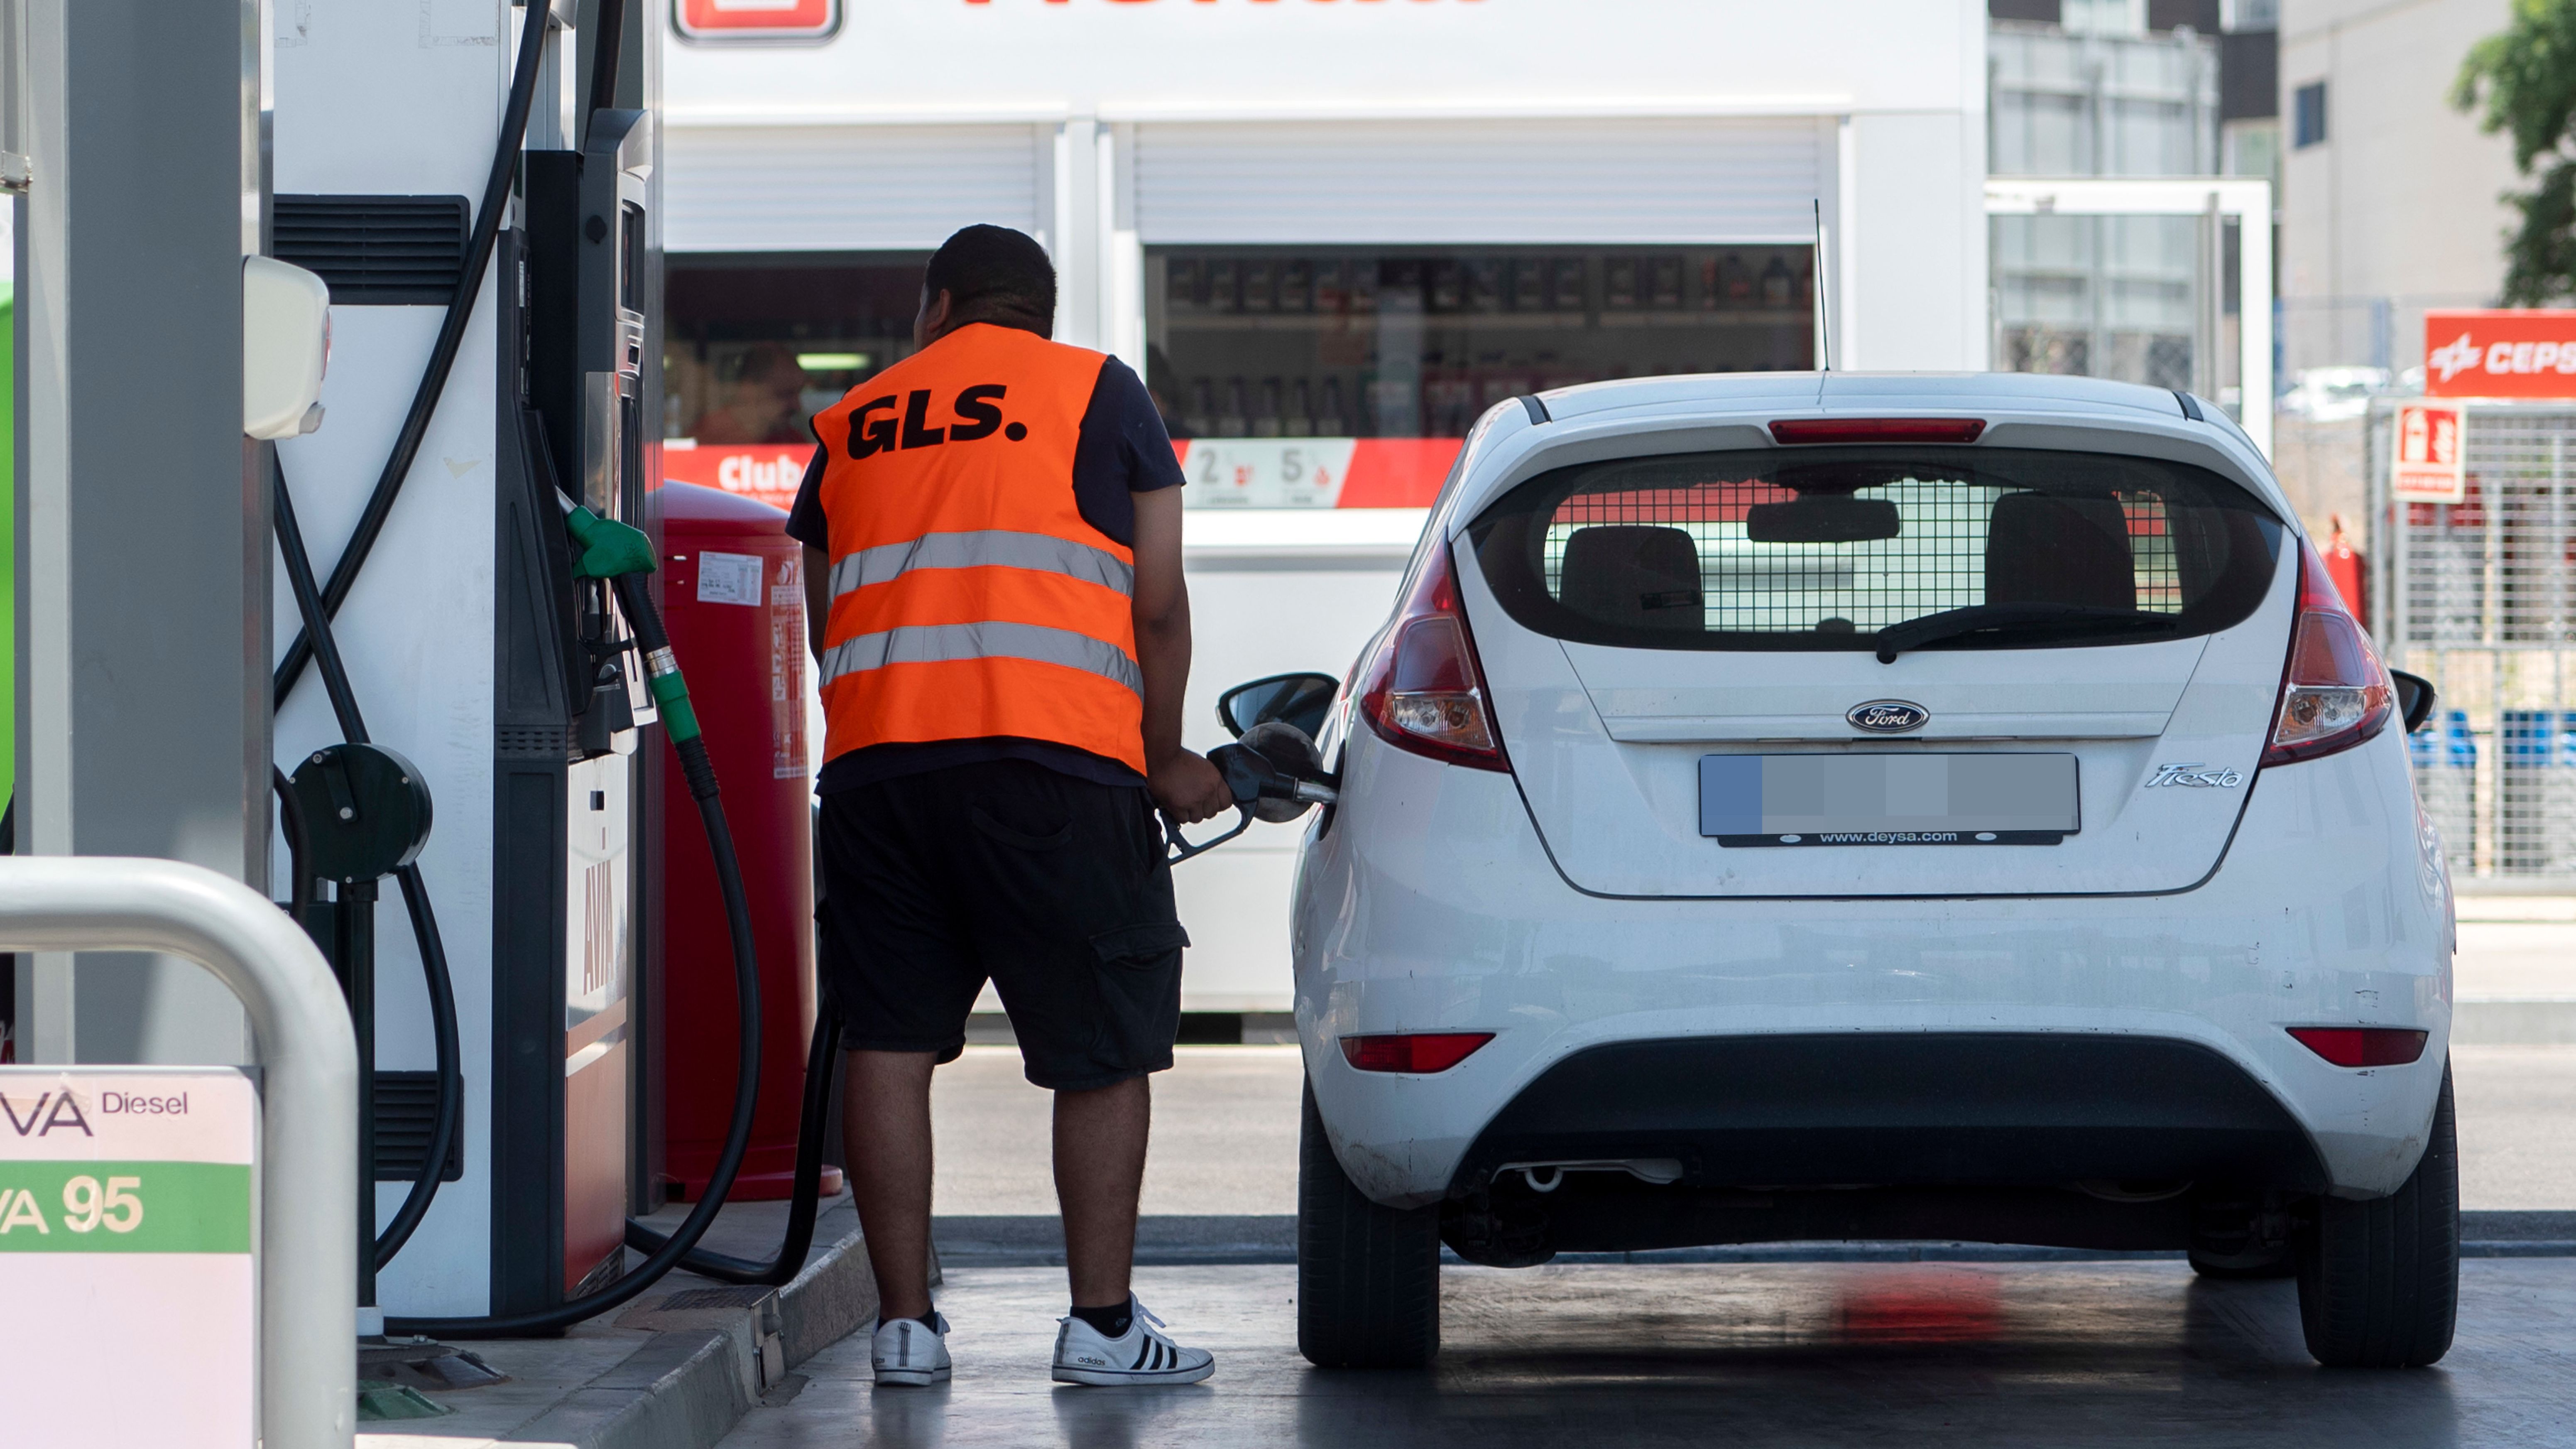 The price of fuel continues to fall, but the gap between diesel and gasoline increases